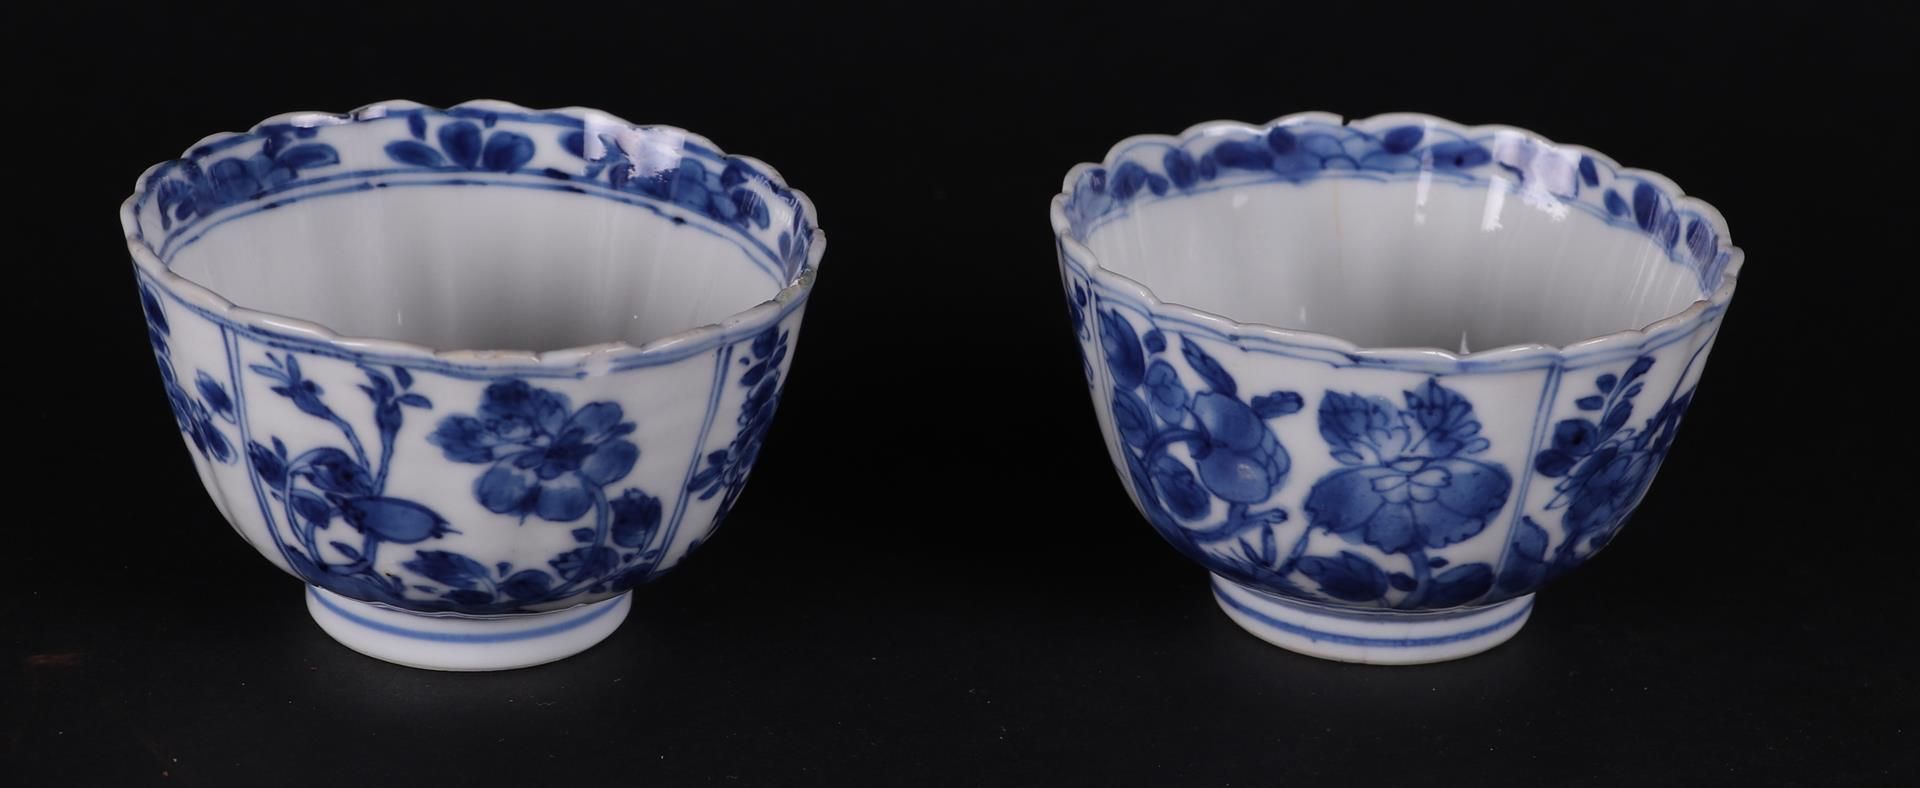 Two ribbed porcelain bowls with rich floral decoration in borders, both marked on the bottom.